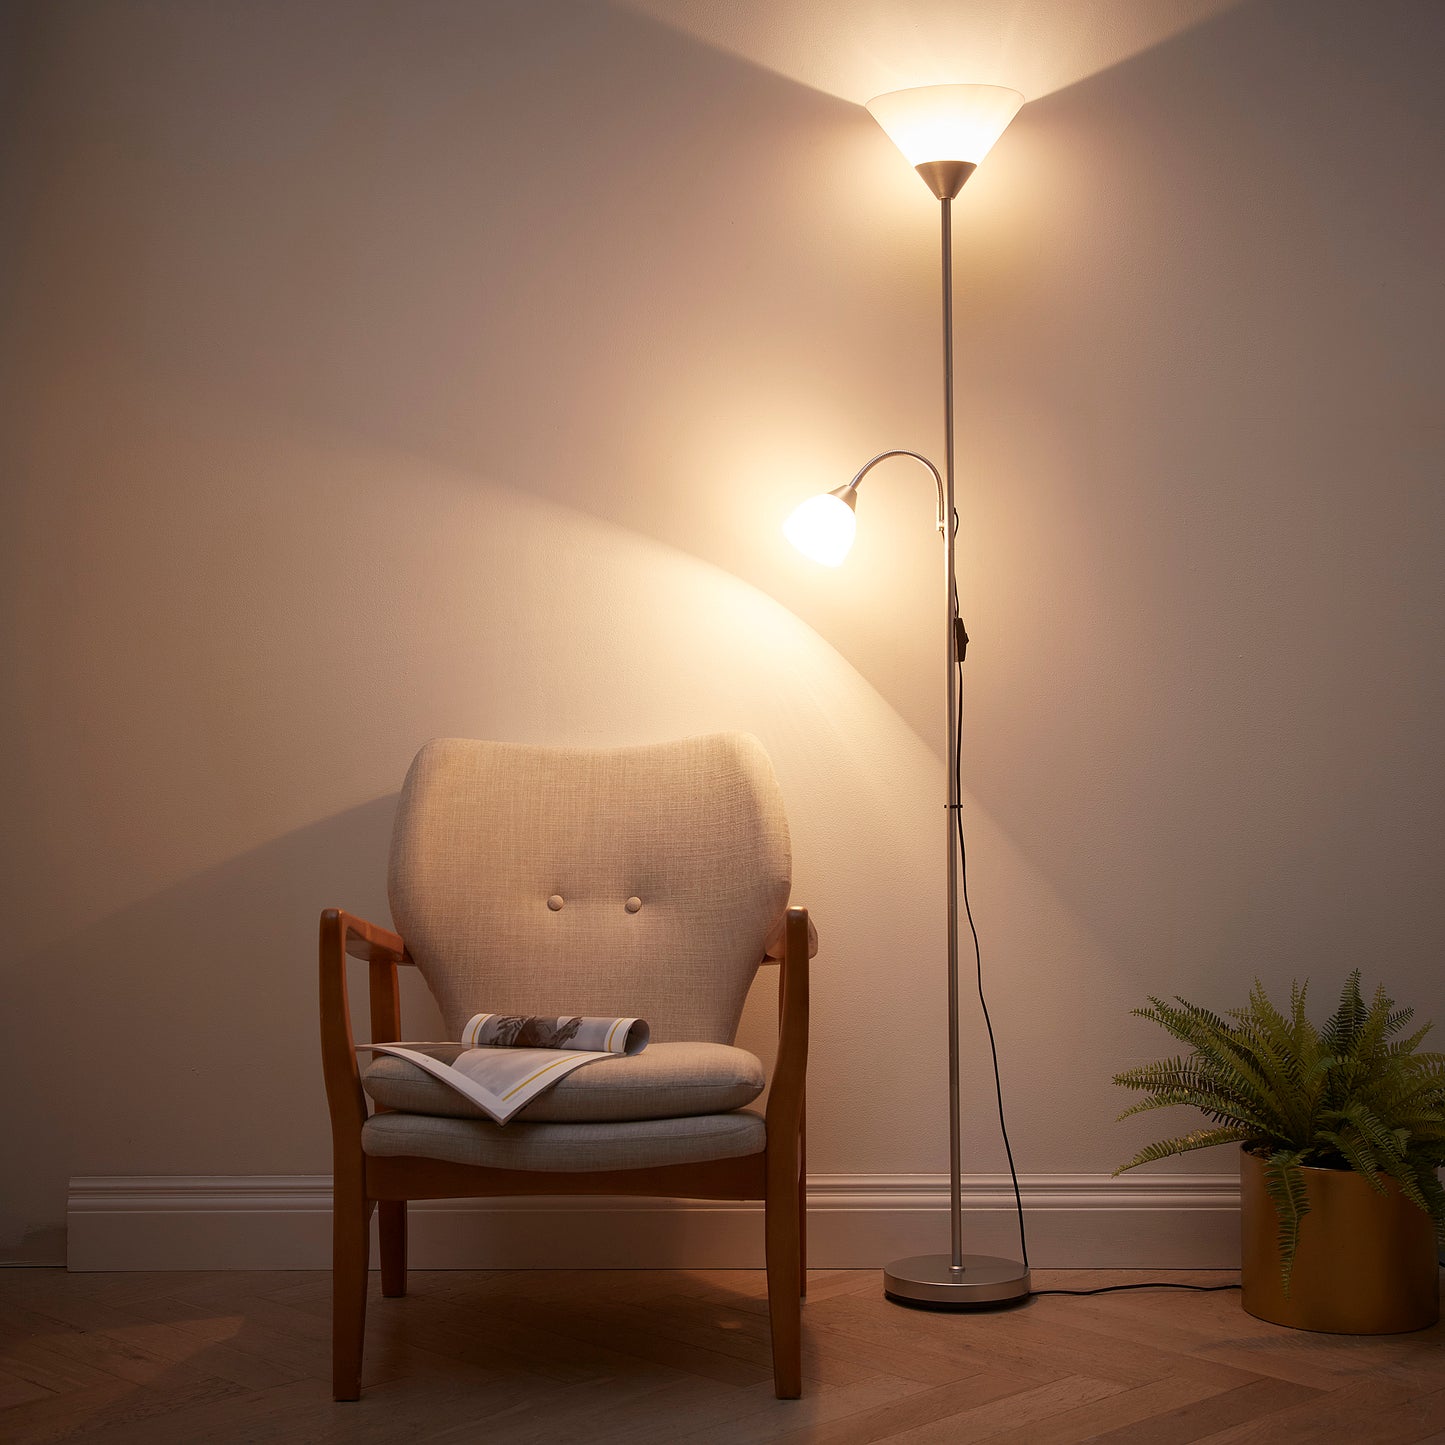 Mother and Child Floor Lamp in a Light Silver Colour with White Shades 180cm Tall